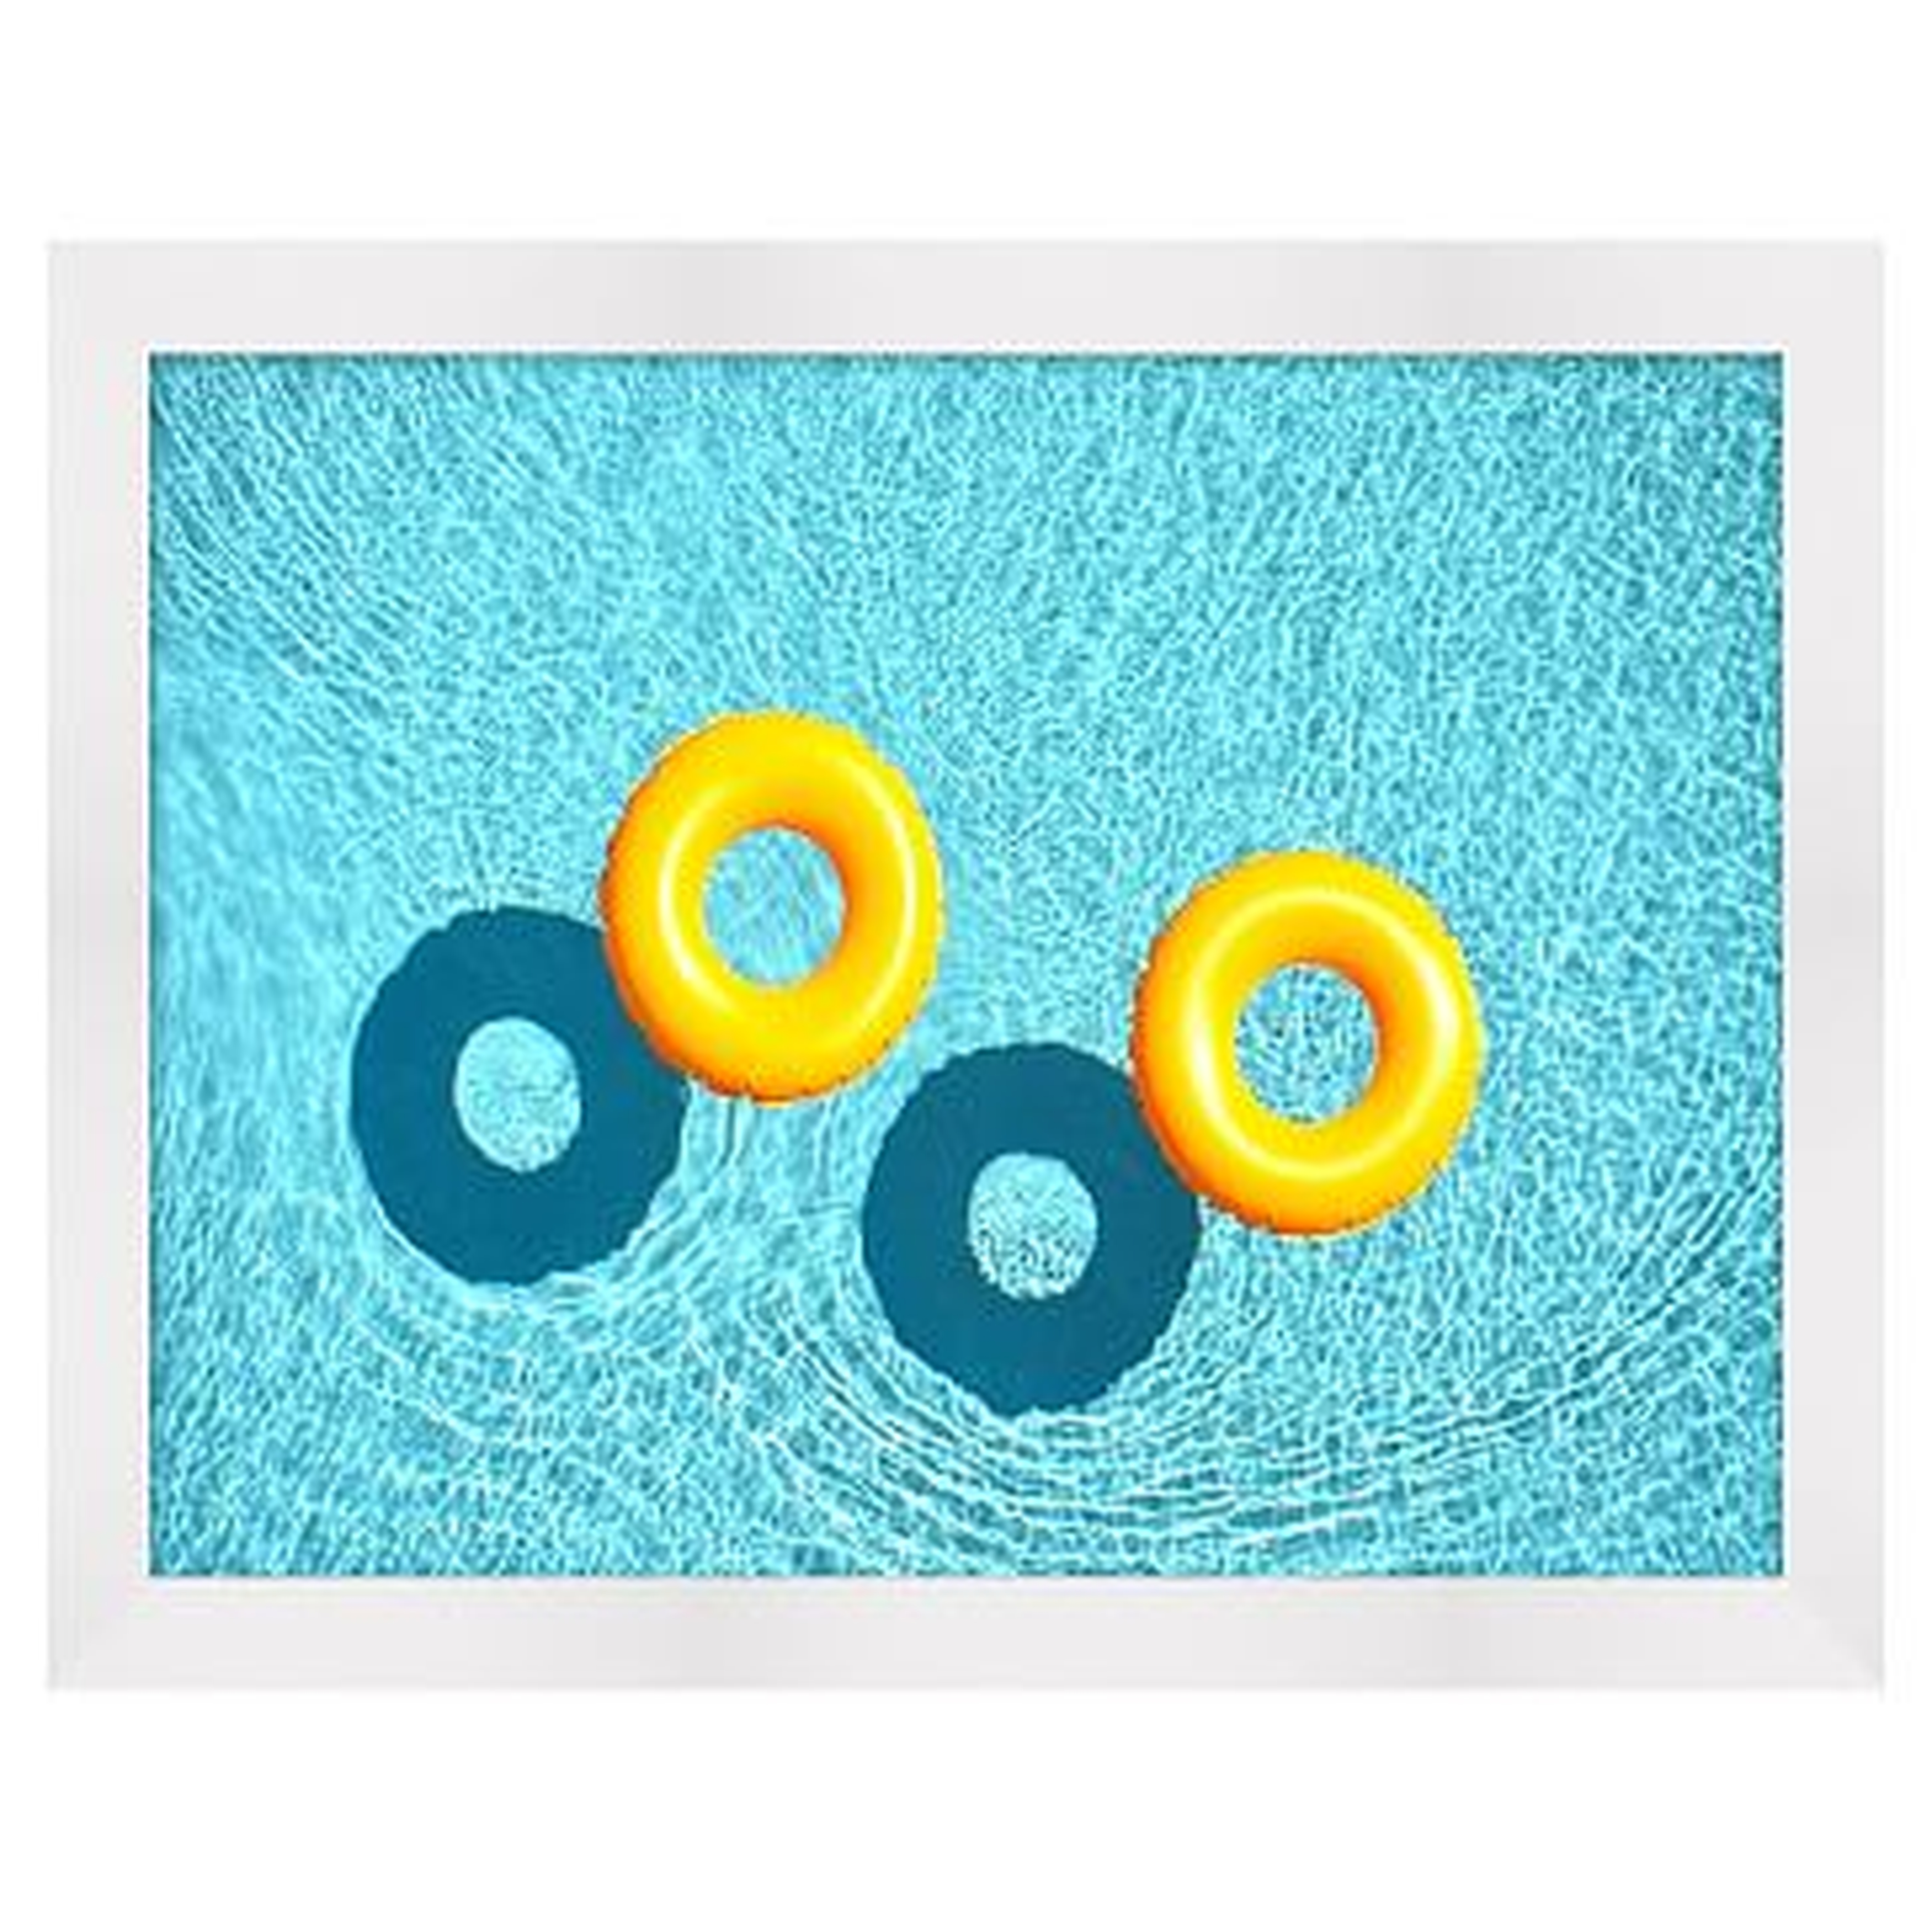 Pool Rings Photograph, Multi, Small - West Elm